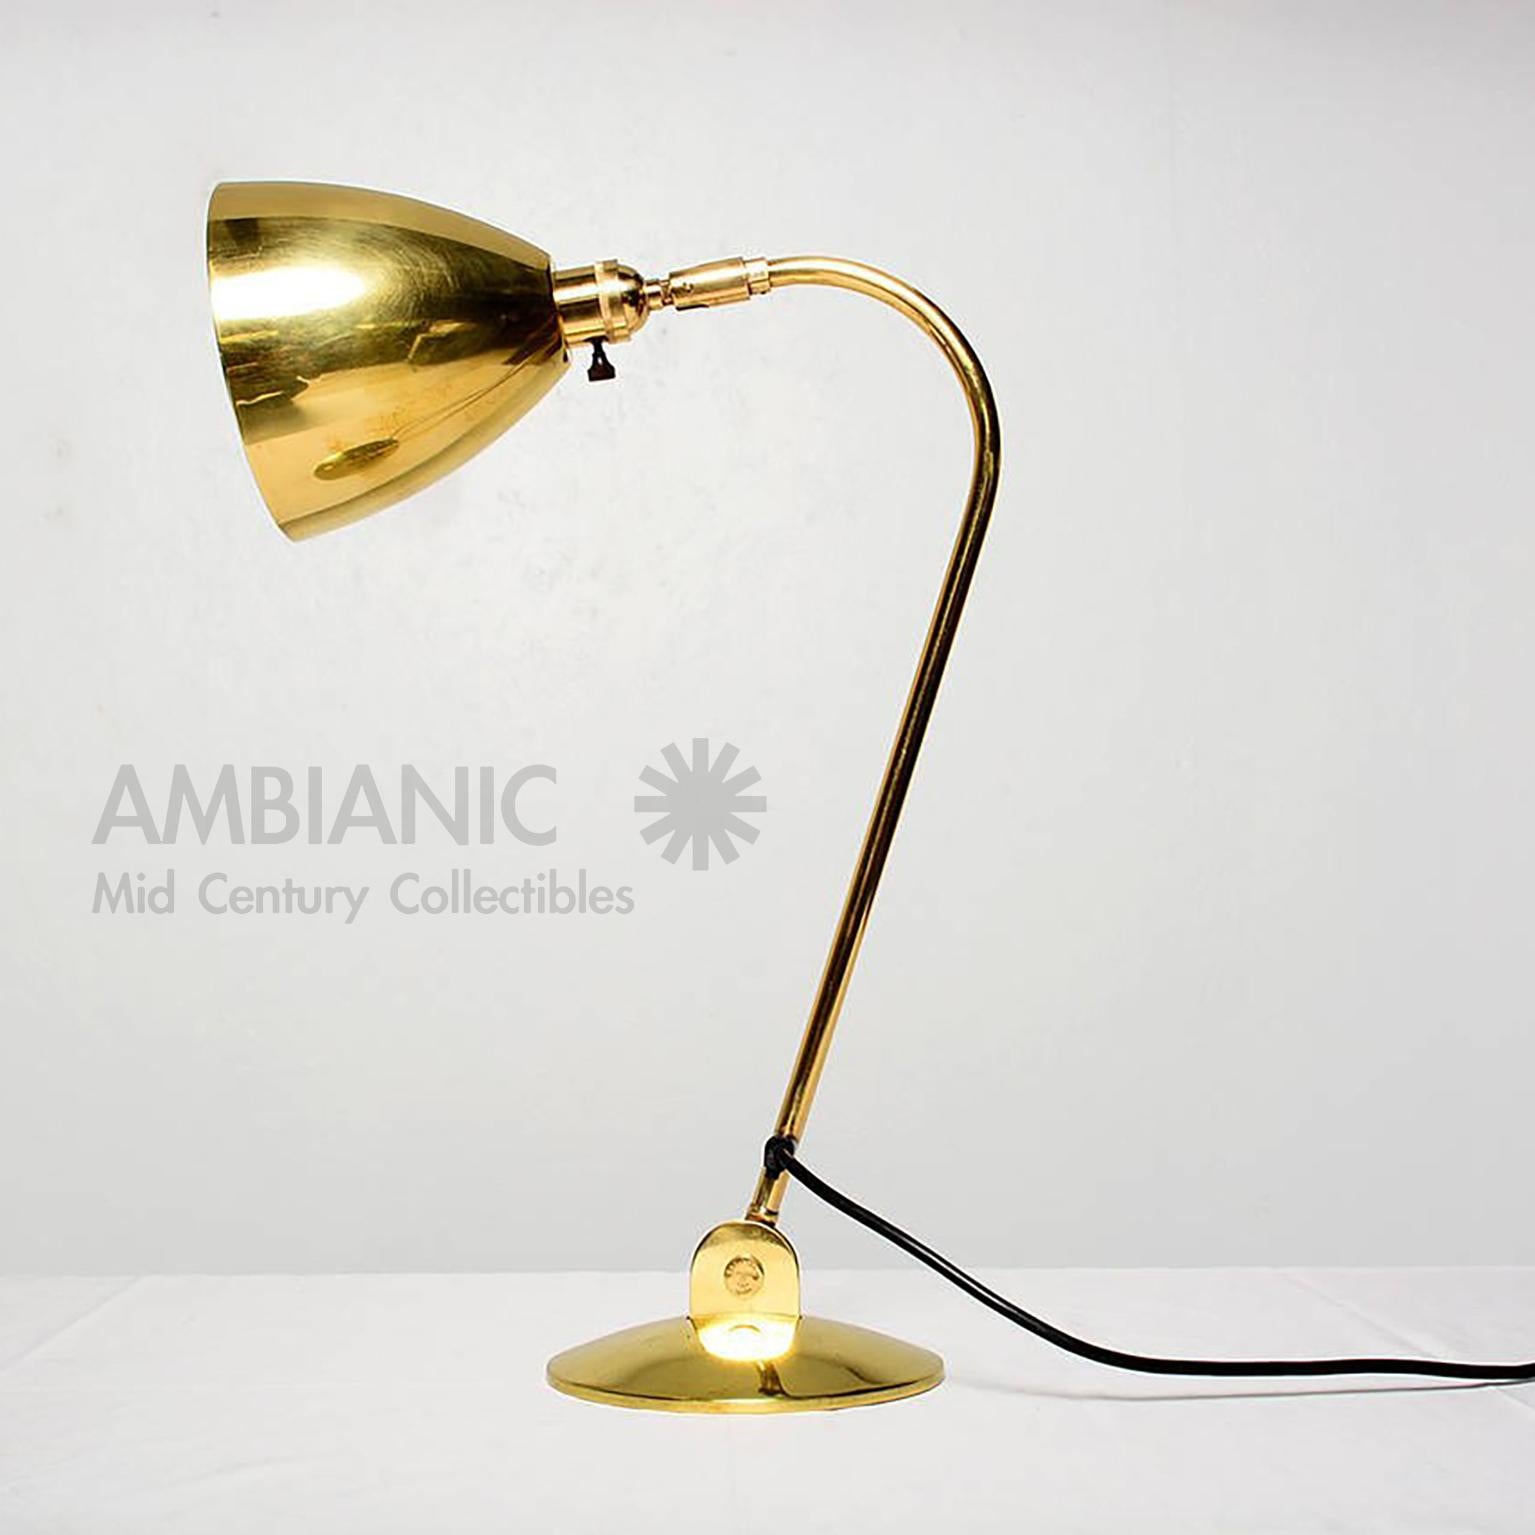 AMBIANIC is pleased to present: OMI best British desk-table reading lamp, fully adjustable, in a beautiful brass mod design. 

The top hardware has the stamp from OMI.

Excellent working condition. Ready to go. Brass is very clean. MCM vintage,